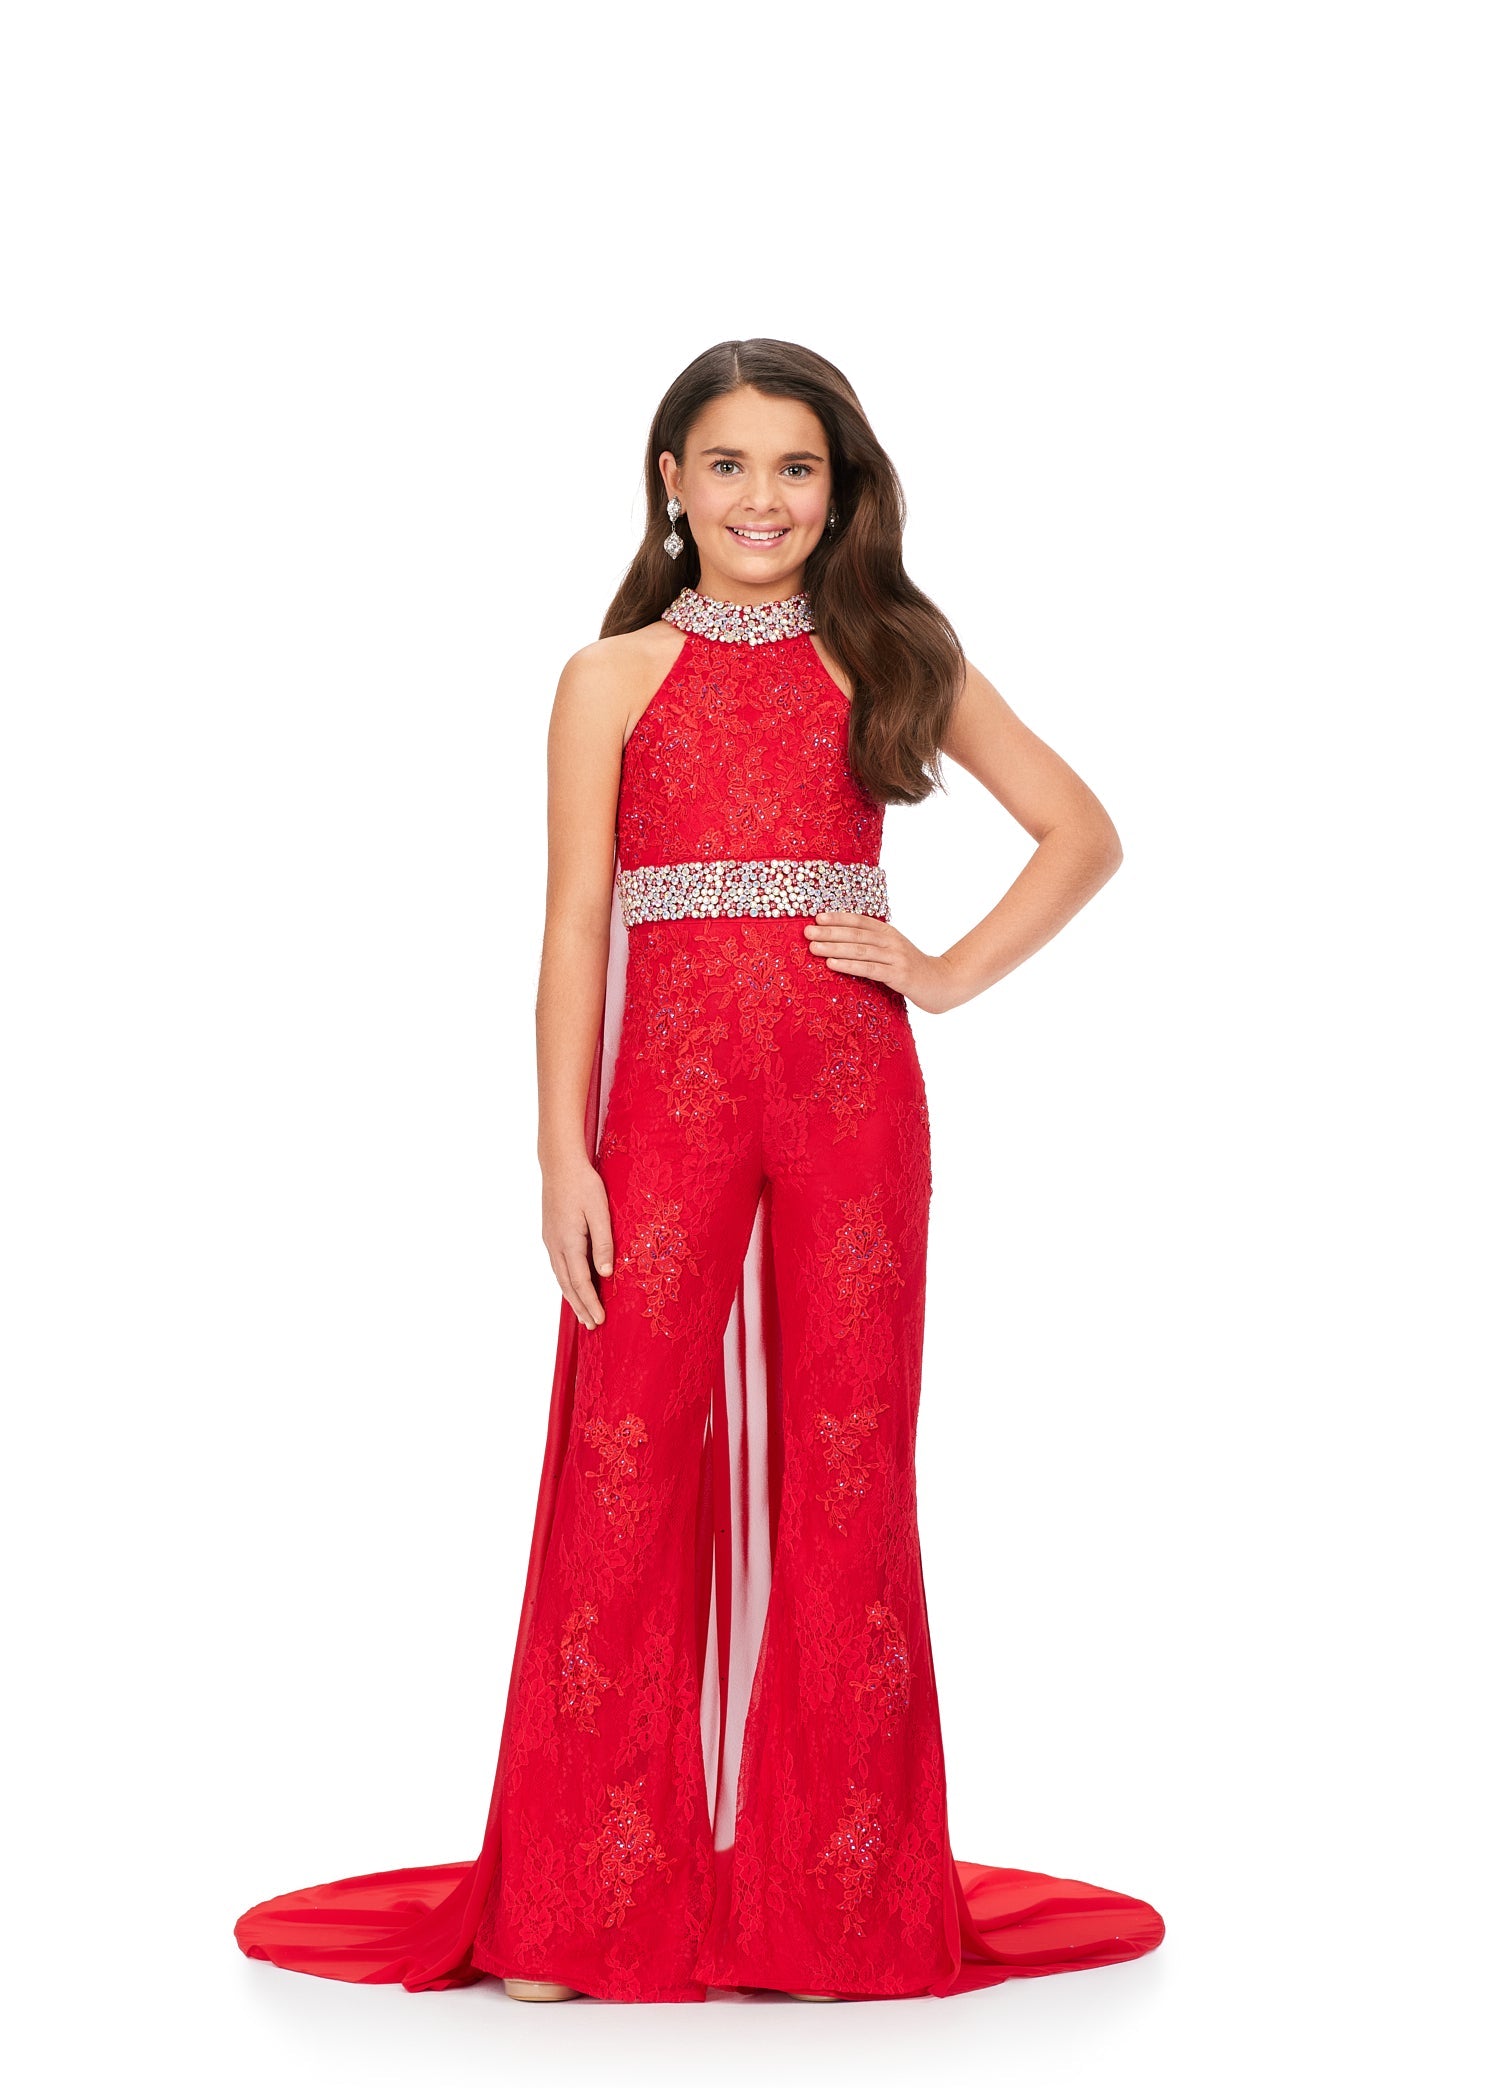 This Ashley Lauren Kids 8225 Girls Lace Crystal Jumpsuit Cape Bell Bottom Pageant Fun Fashion Wear is the perfect way to show off your sense of style. Its exquisite halter neckline and beaded accents make it a truly eye-catching piece. The chiffon cape and flare pant legs add a dramatic element and the jeweled belt and choker provide a touch of sparkle. Make a bold fashion statement with this beautiful jumpsuit!  Sizes: 4-16  Colors: Blue, Pink, Red